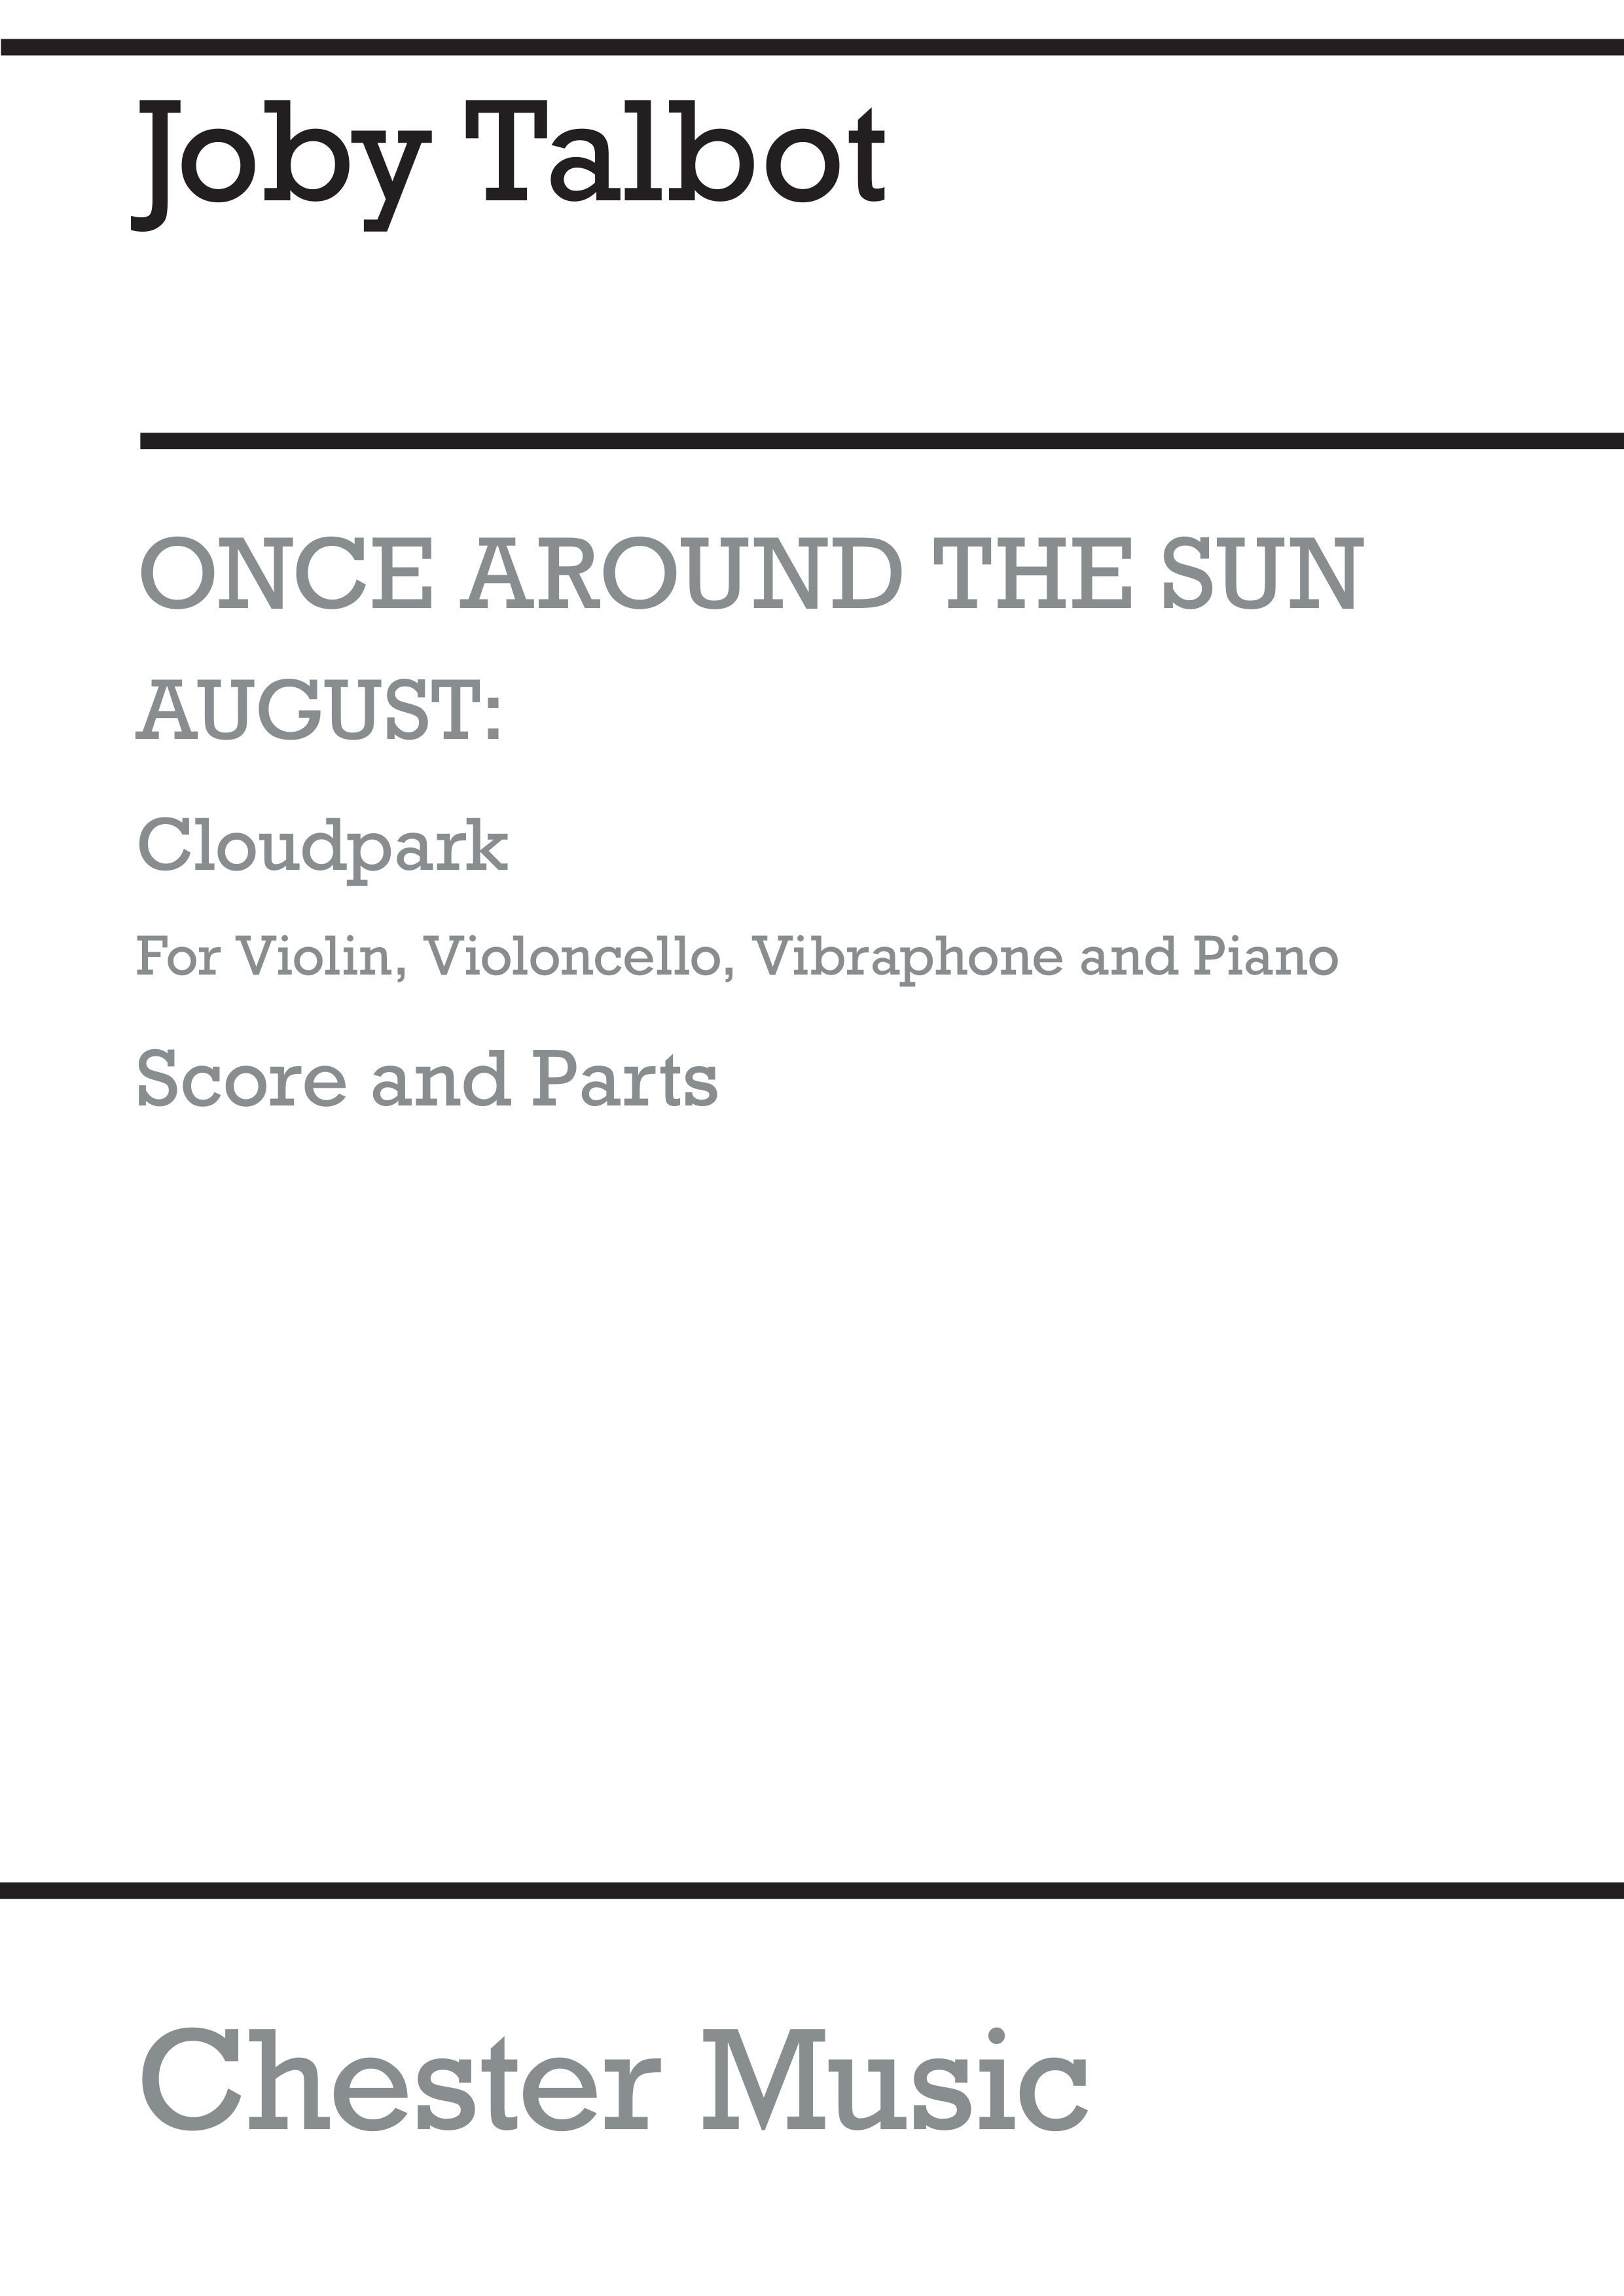 Joby Talbot: August - Cloudpark: Chamber Ensemble: Score and Parts